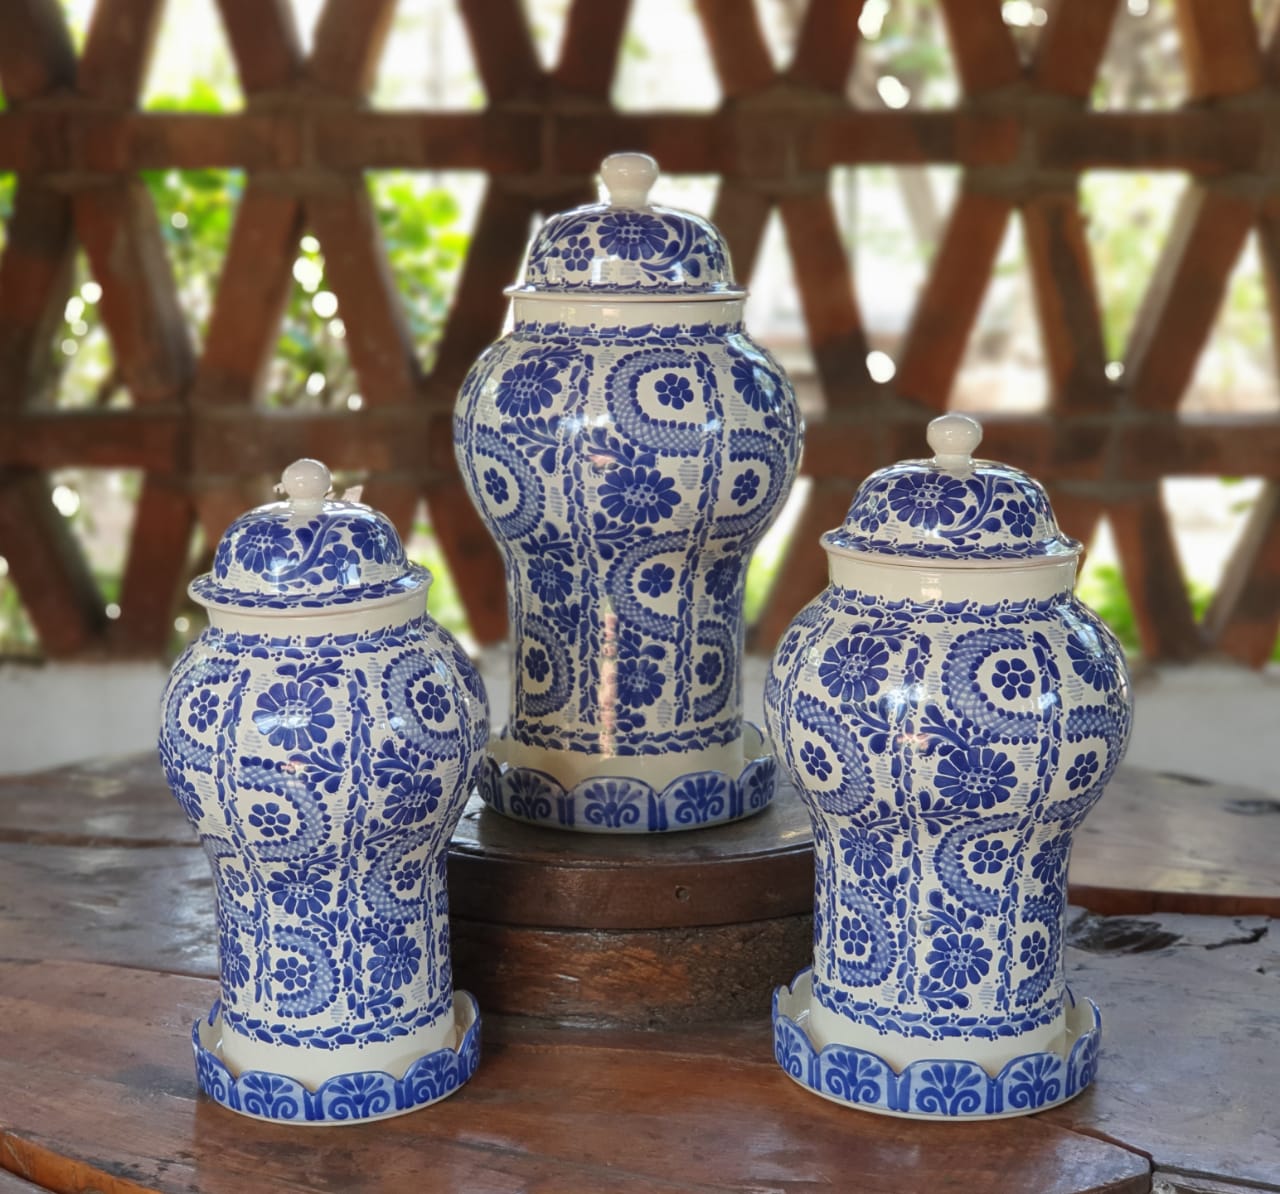 Decorative Vase Olan Set of 3 pieces (13.8, 15, 16 in H) Blue and White